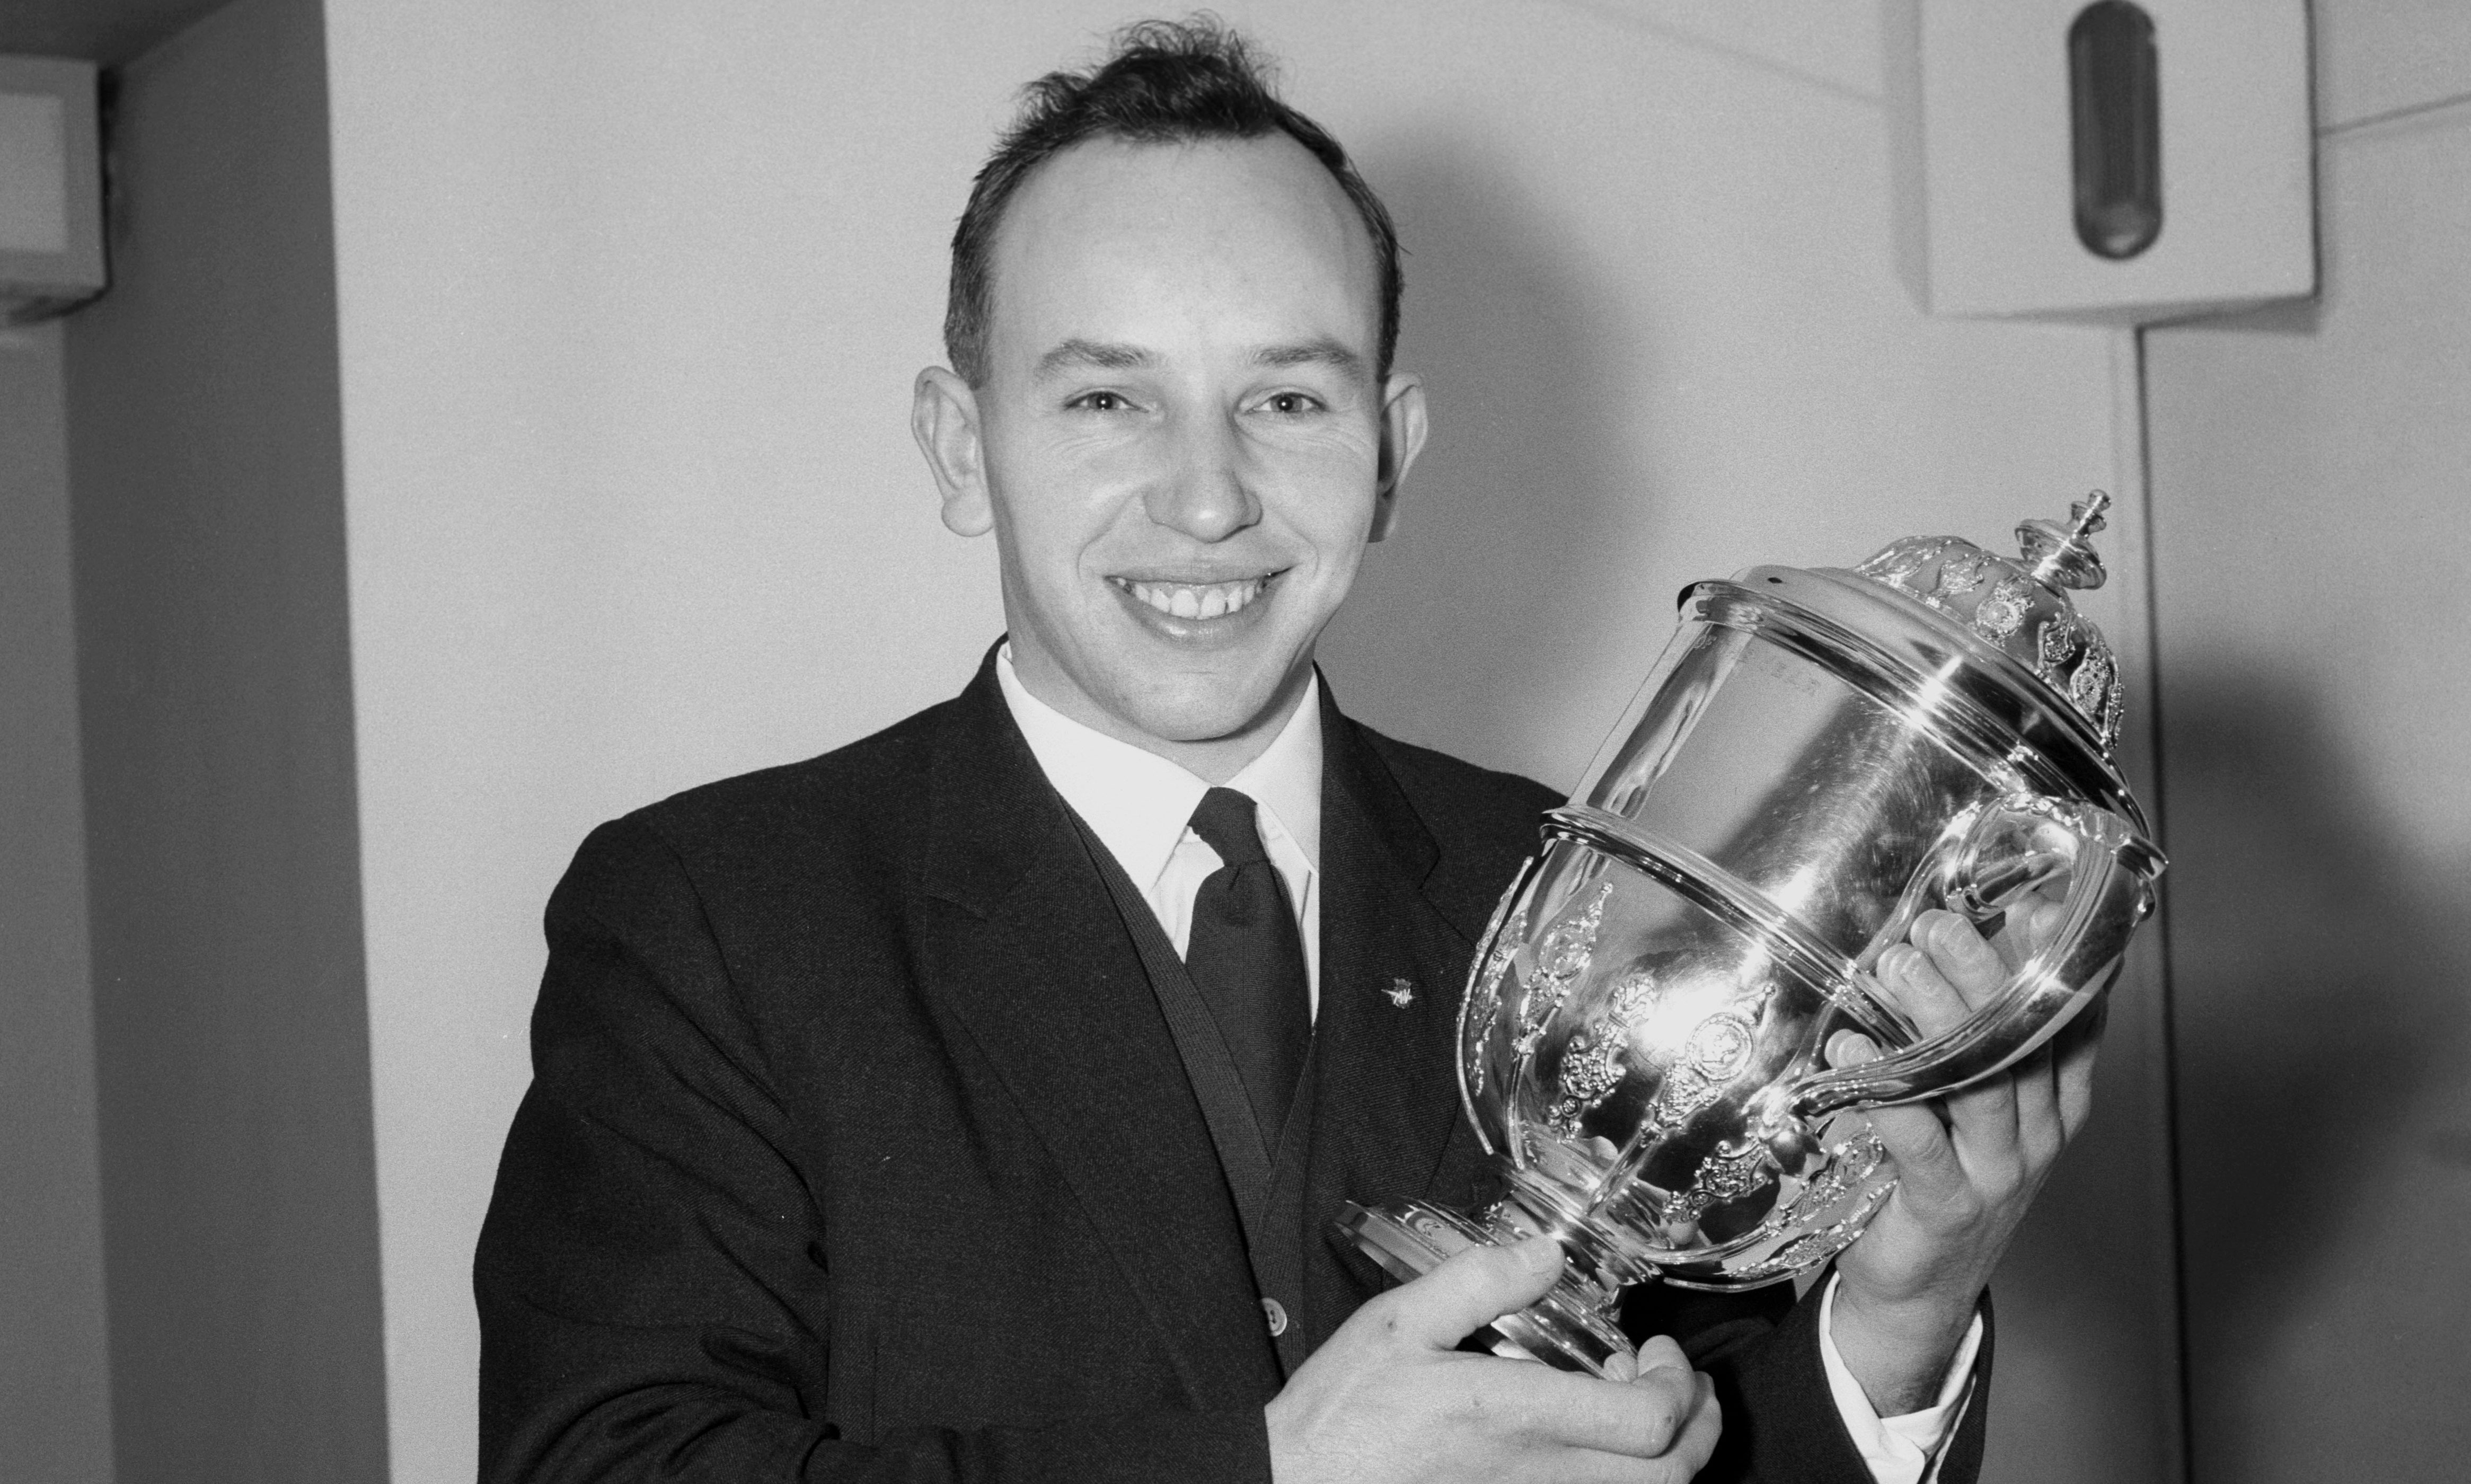 John Surtees never received the knighthood many believed he deserved.